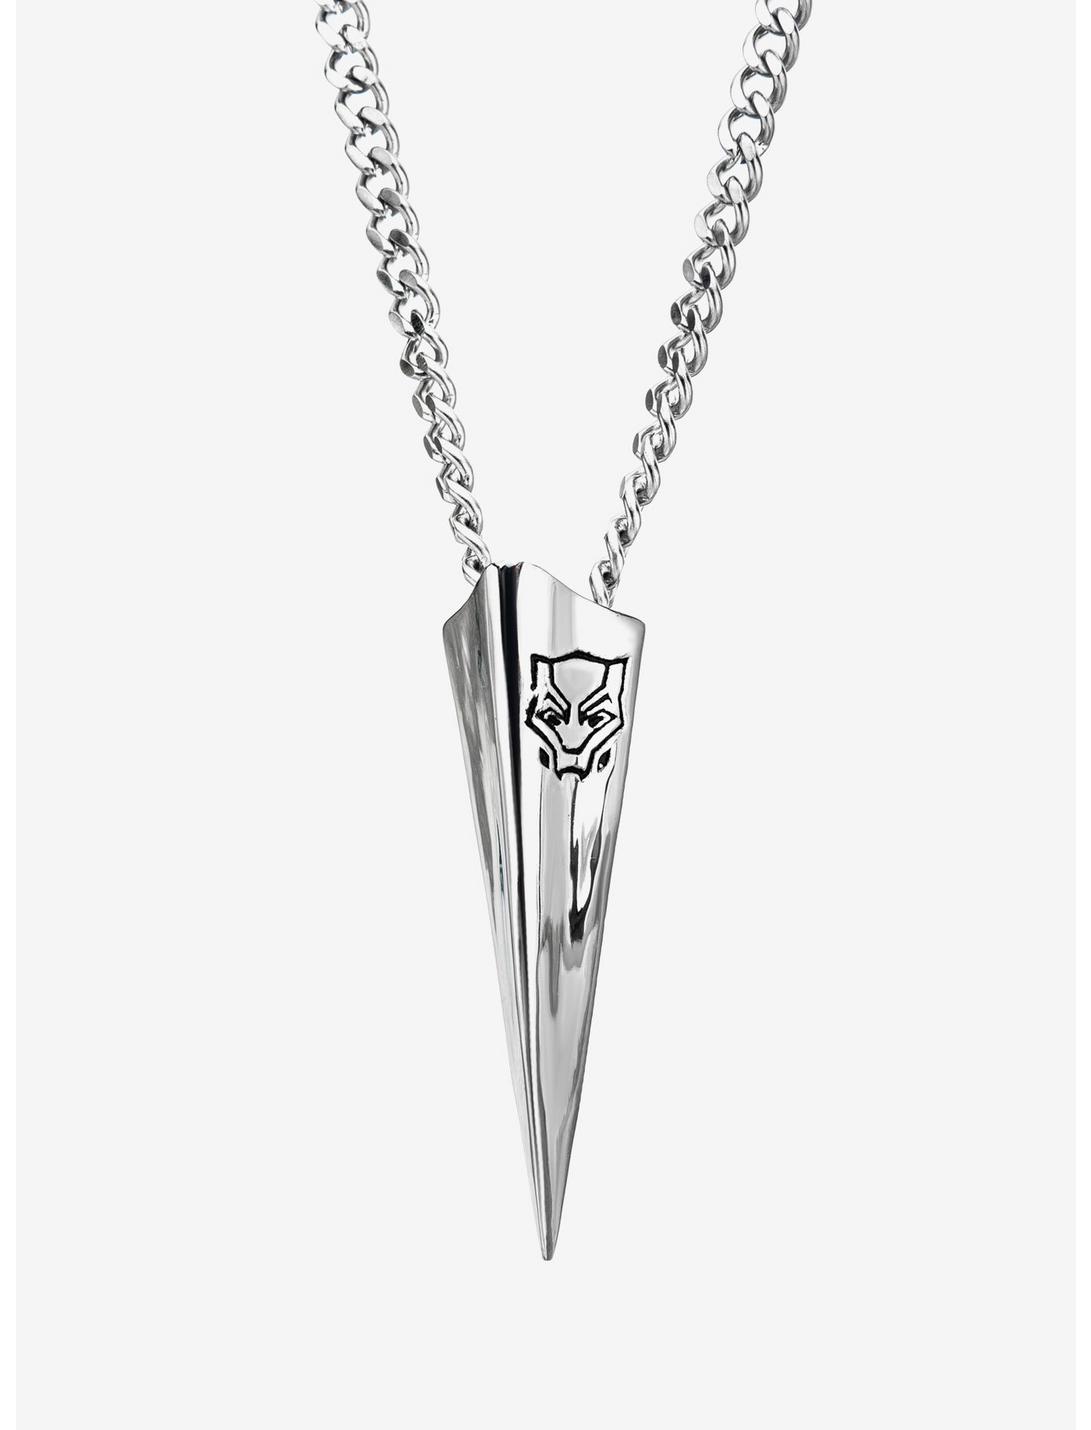 Marvel Black Panther Single Claw Necklace, , hi-res